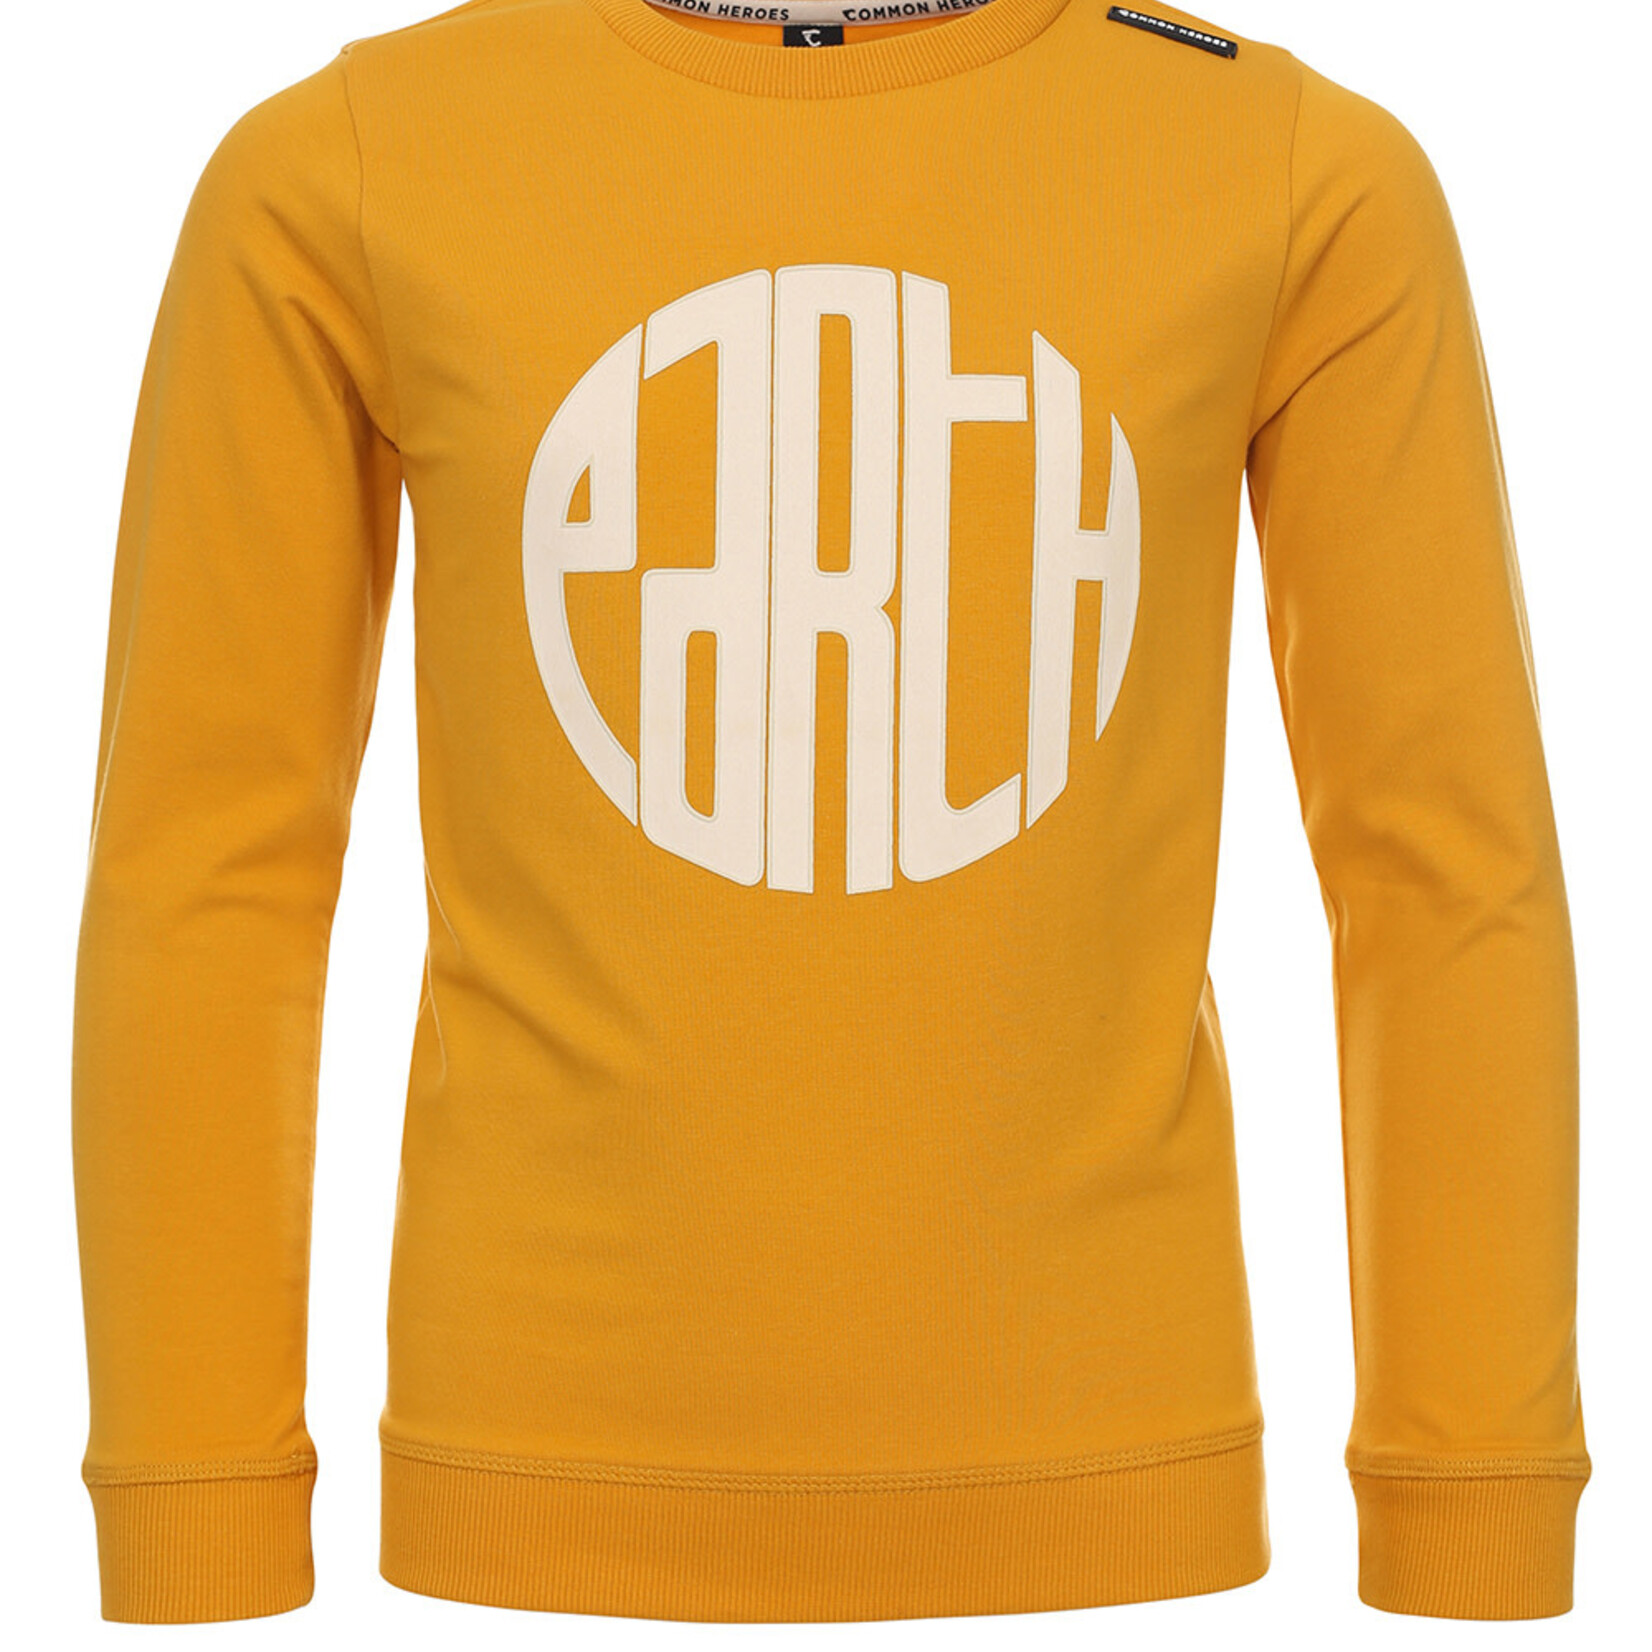 Common Heroes Common Heroes jersey sweater